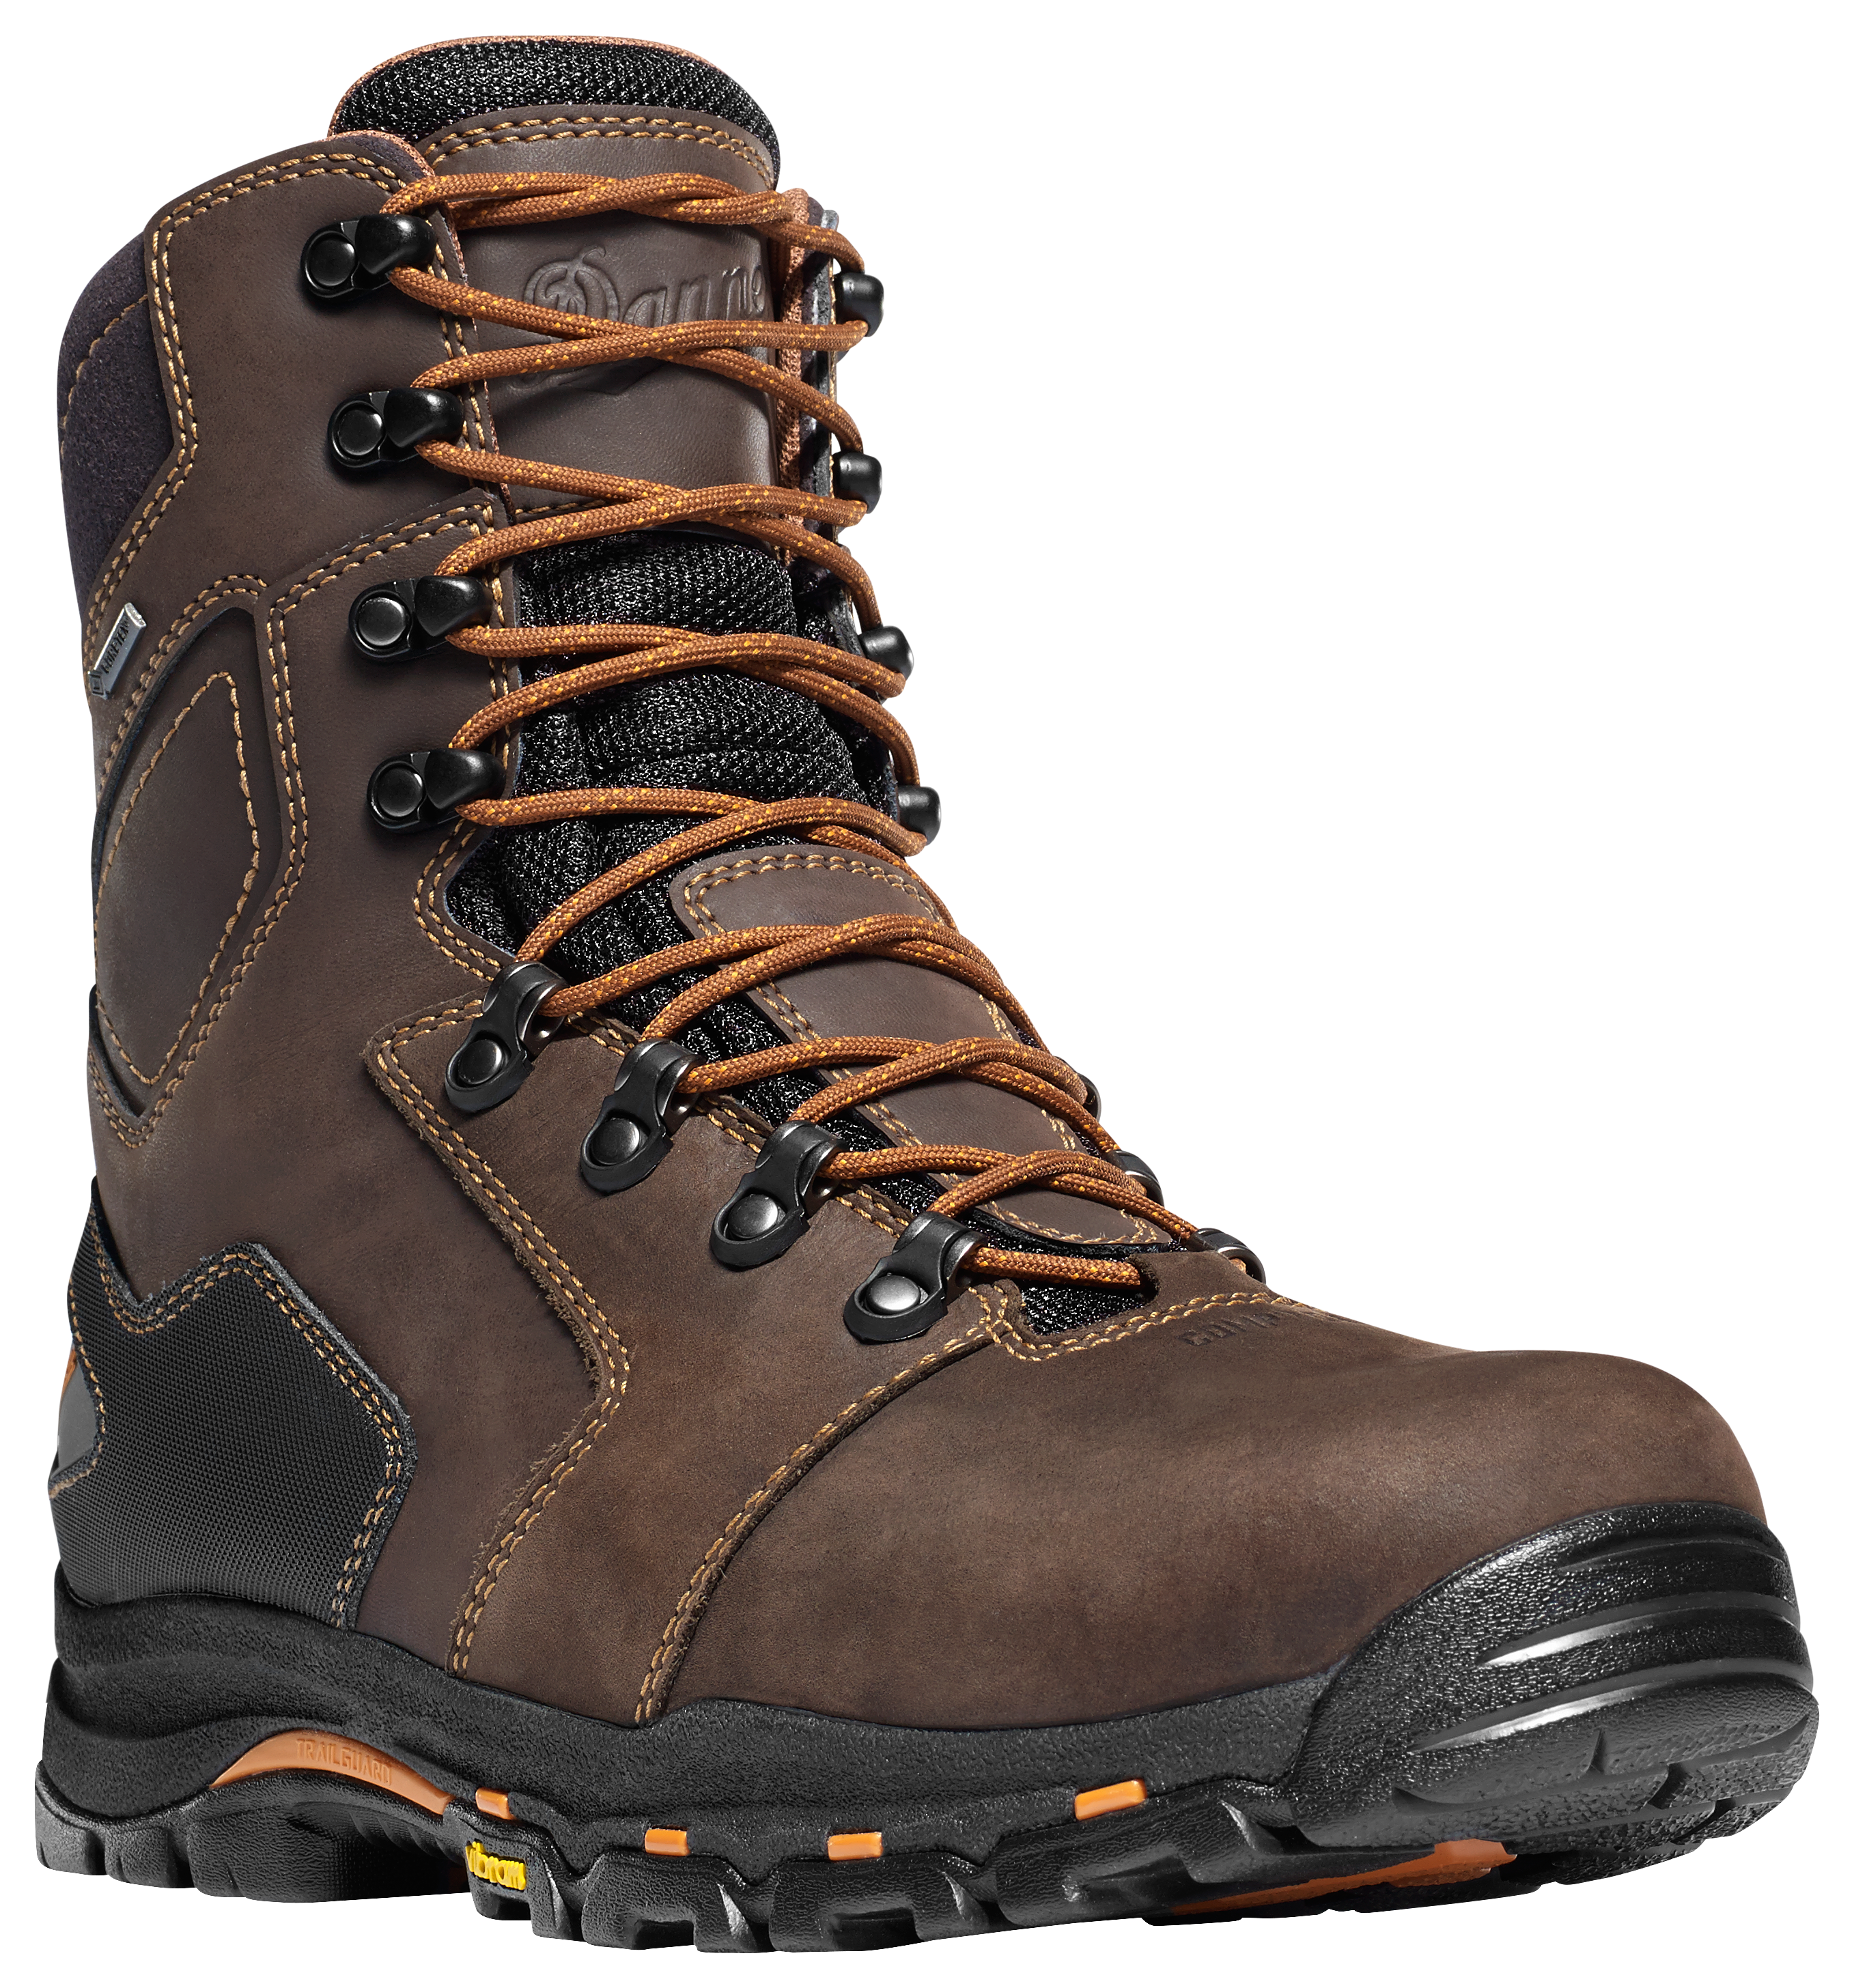 Danner Vicious GORE-TEX Composite Toe Work Boots for Men - Brown - 12W